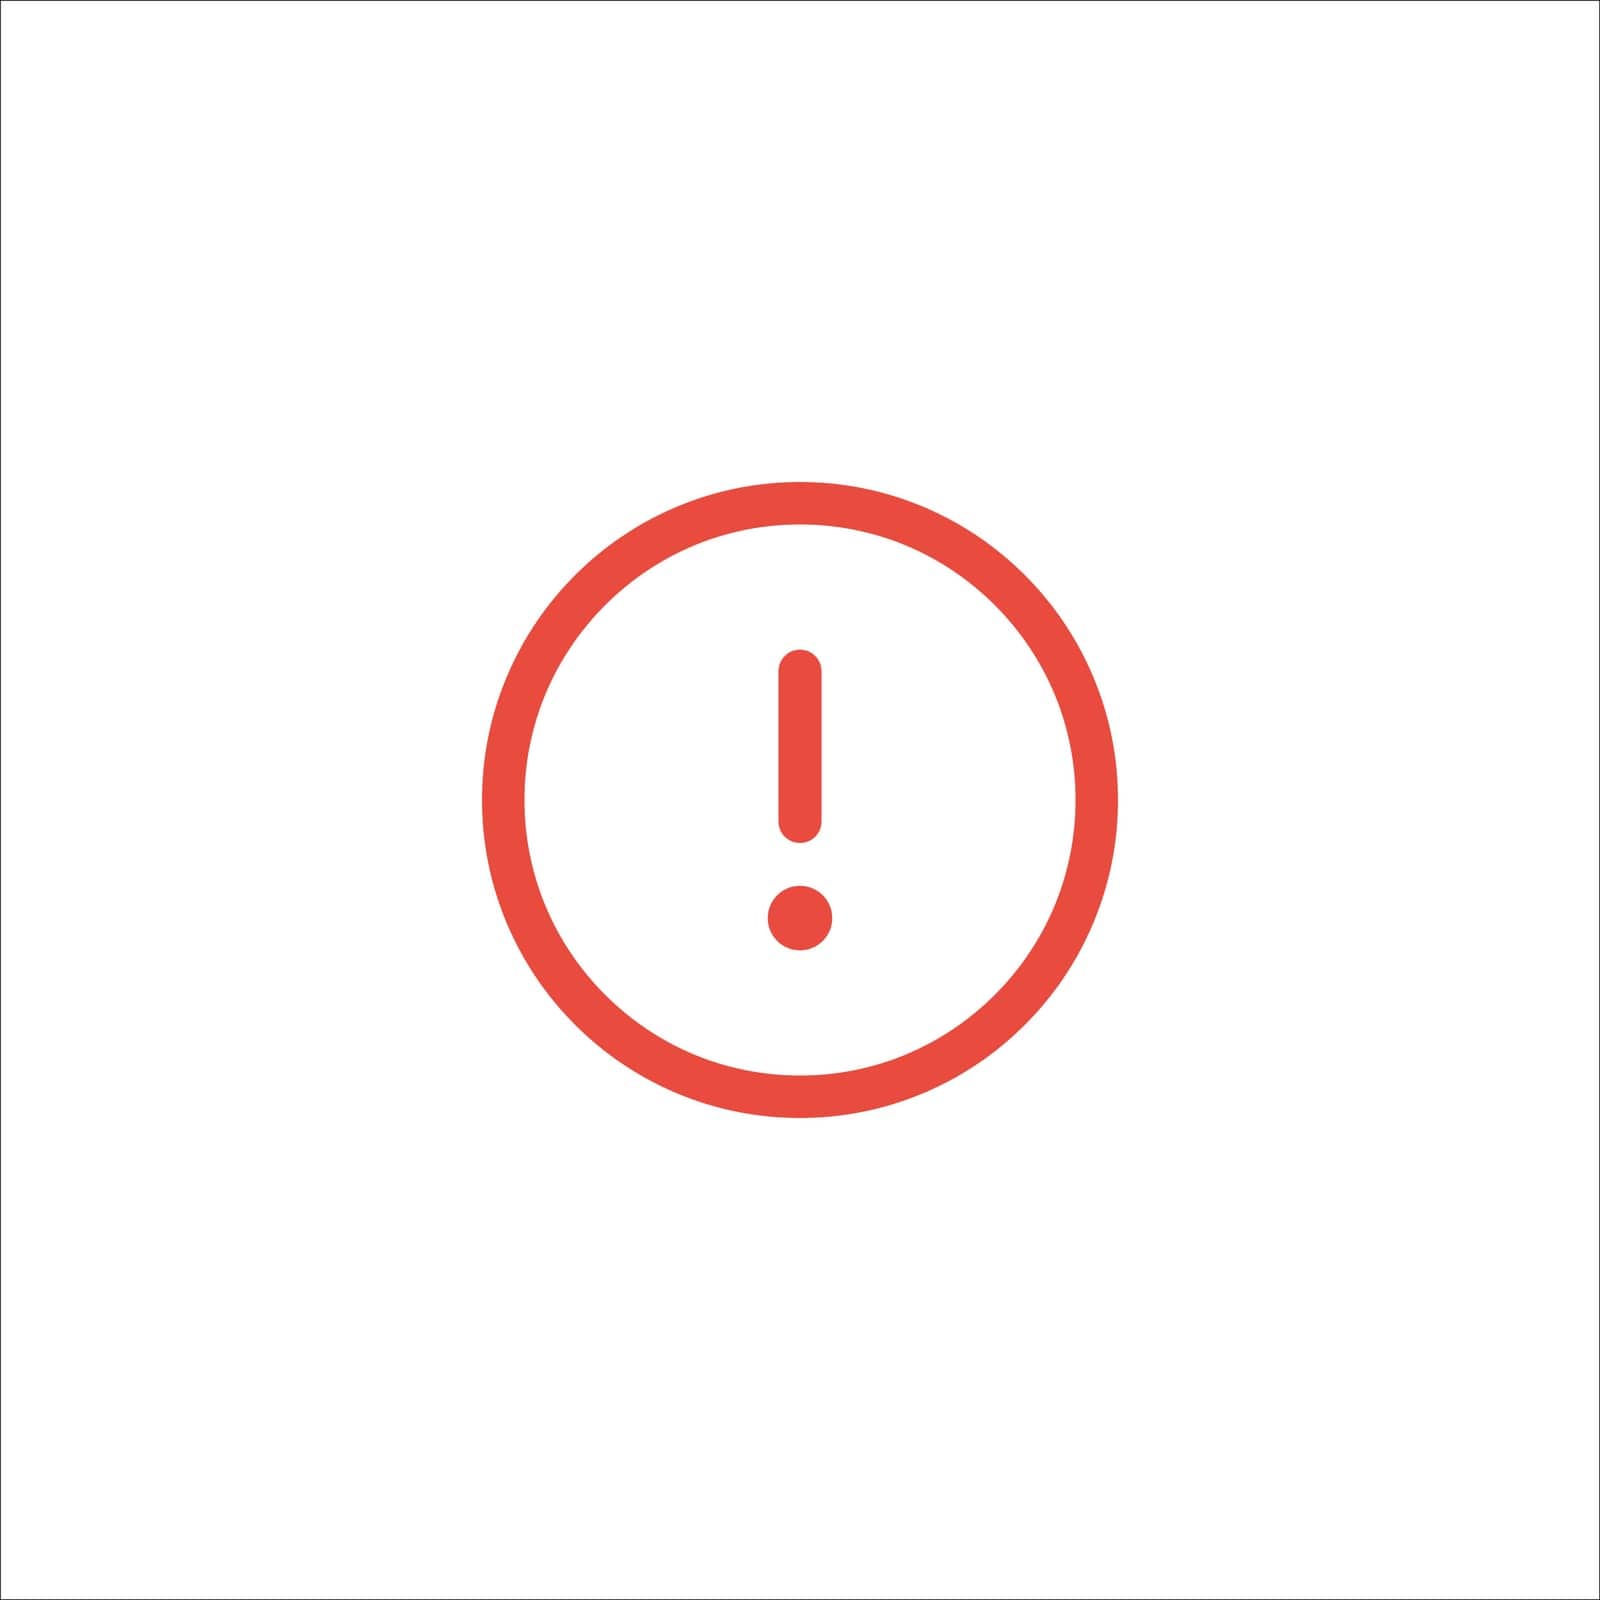 Round Attention red sign with exclamation mark symbol. danger alert caution icon. Error message symbol. Stock vector illustration isolated